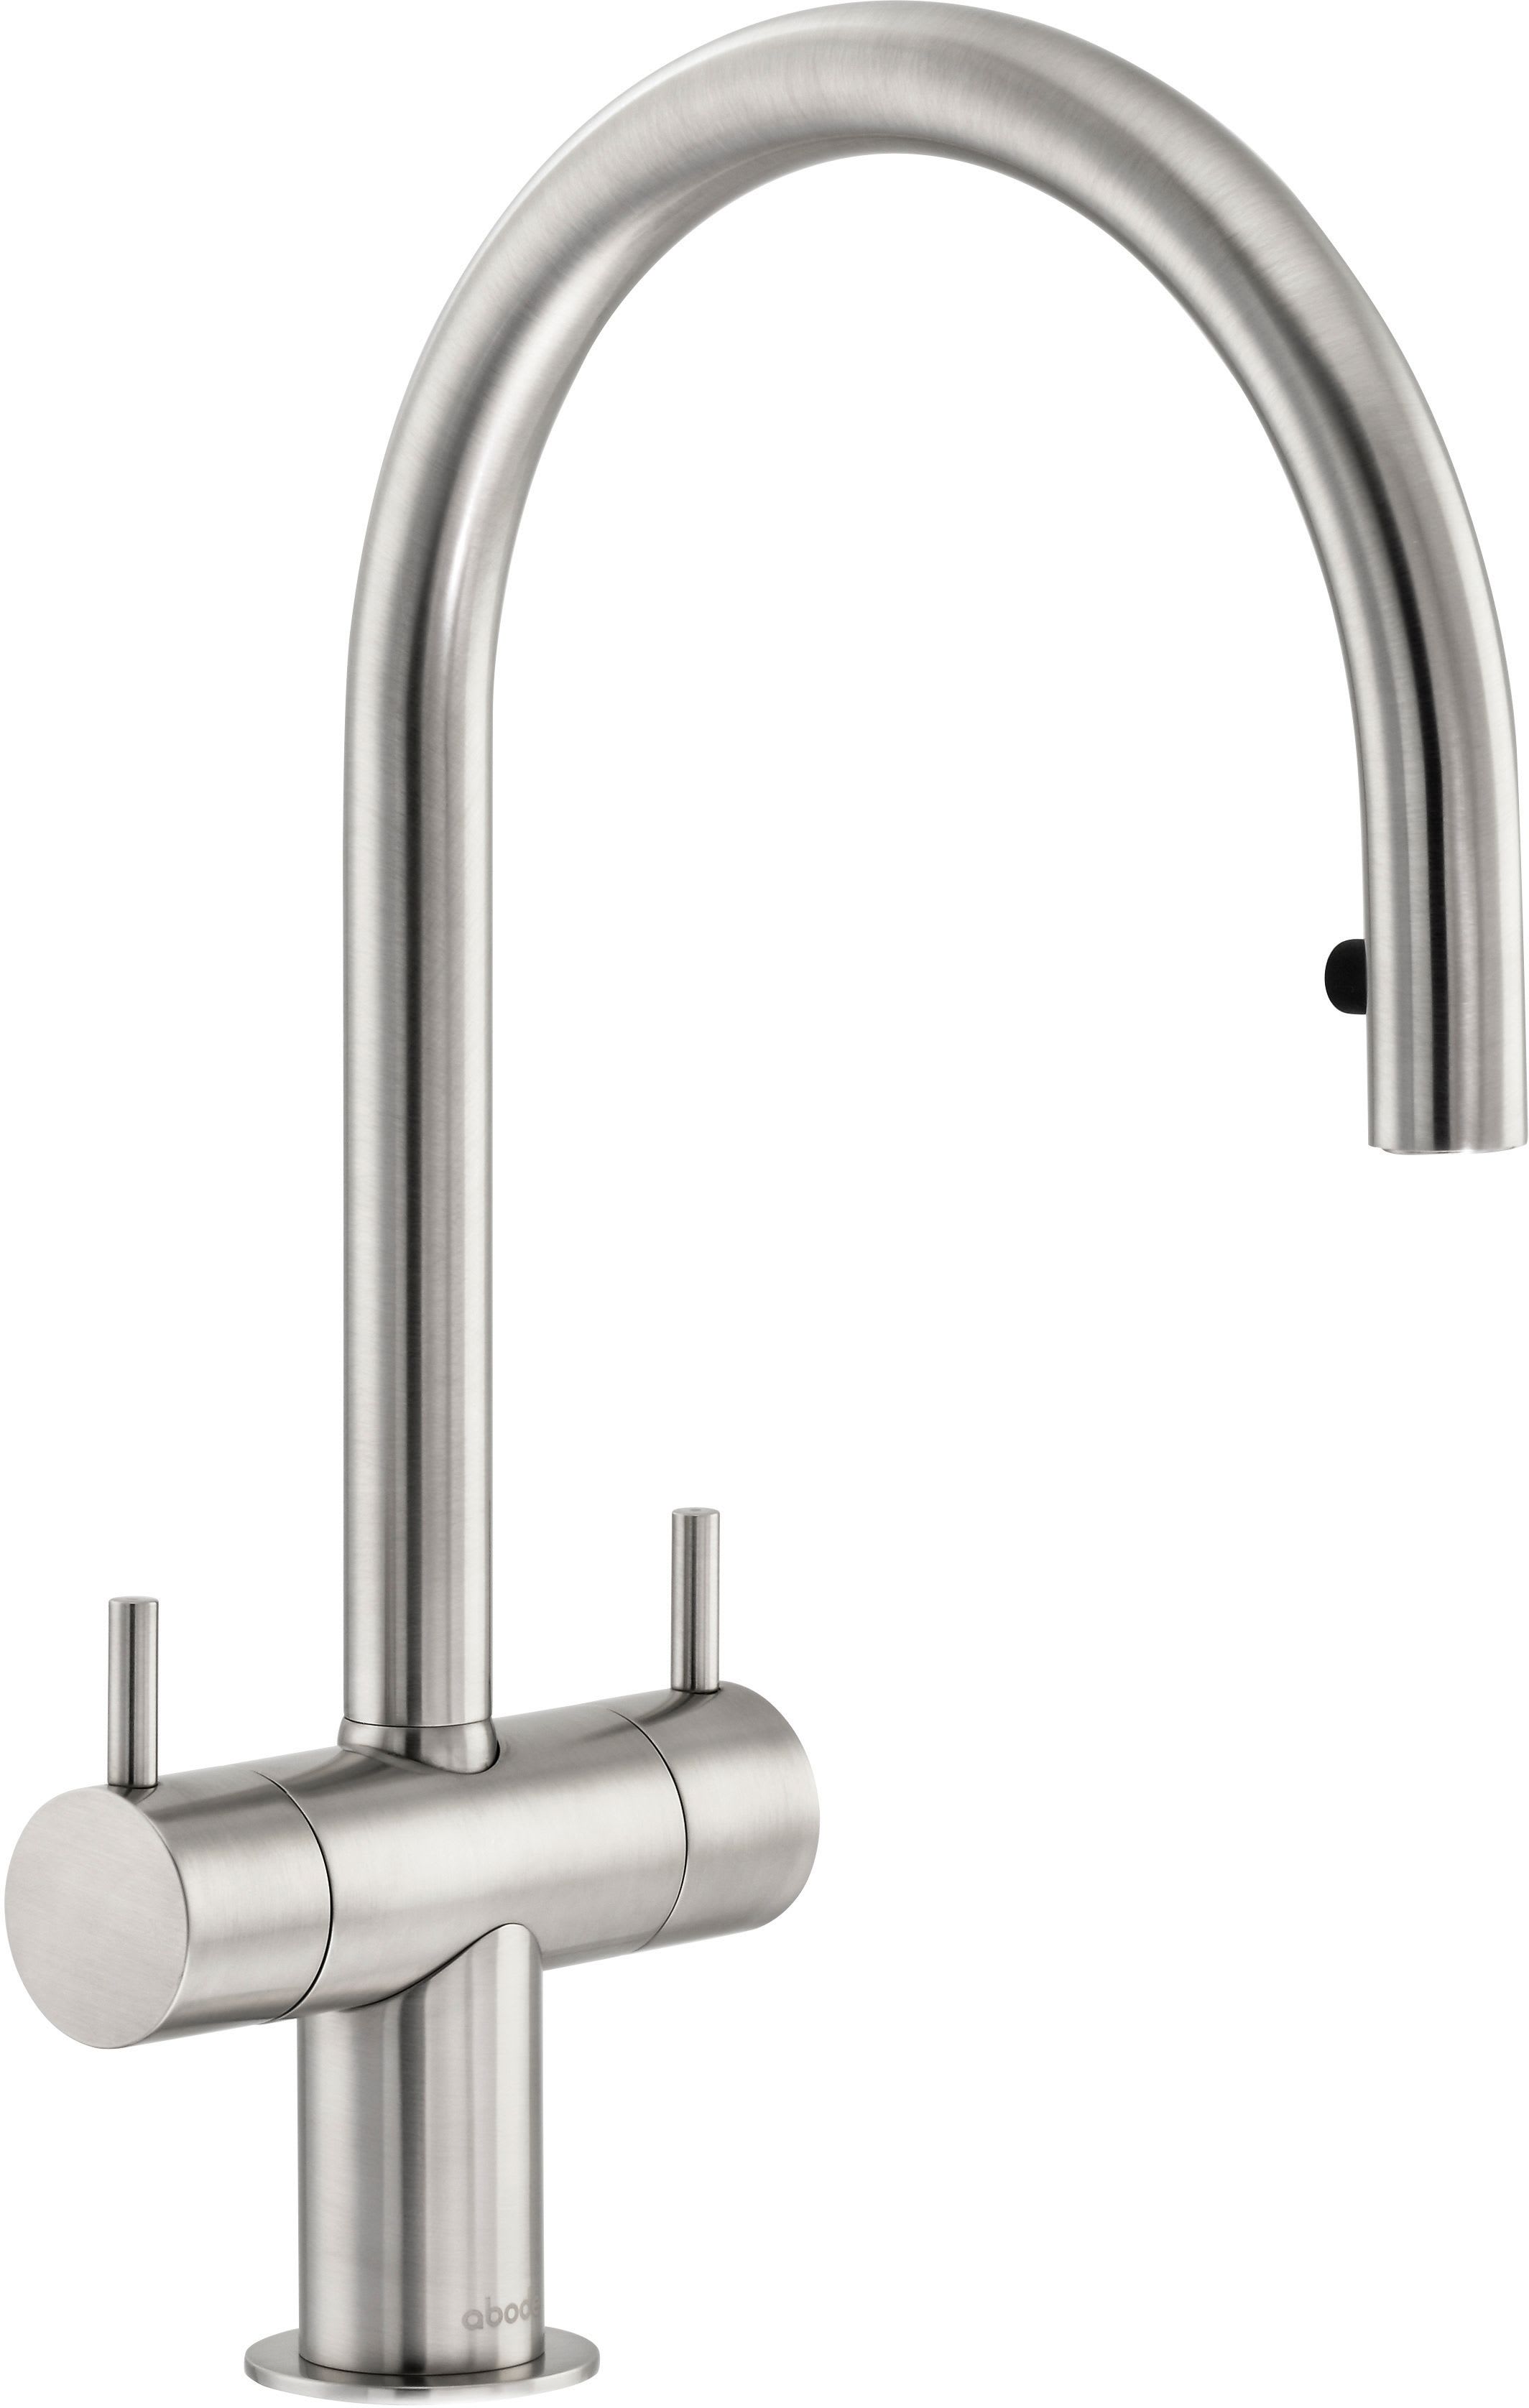 Abode Hesta Dual Lever Pull Out Sink Tap